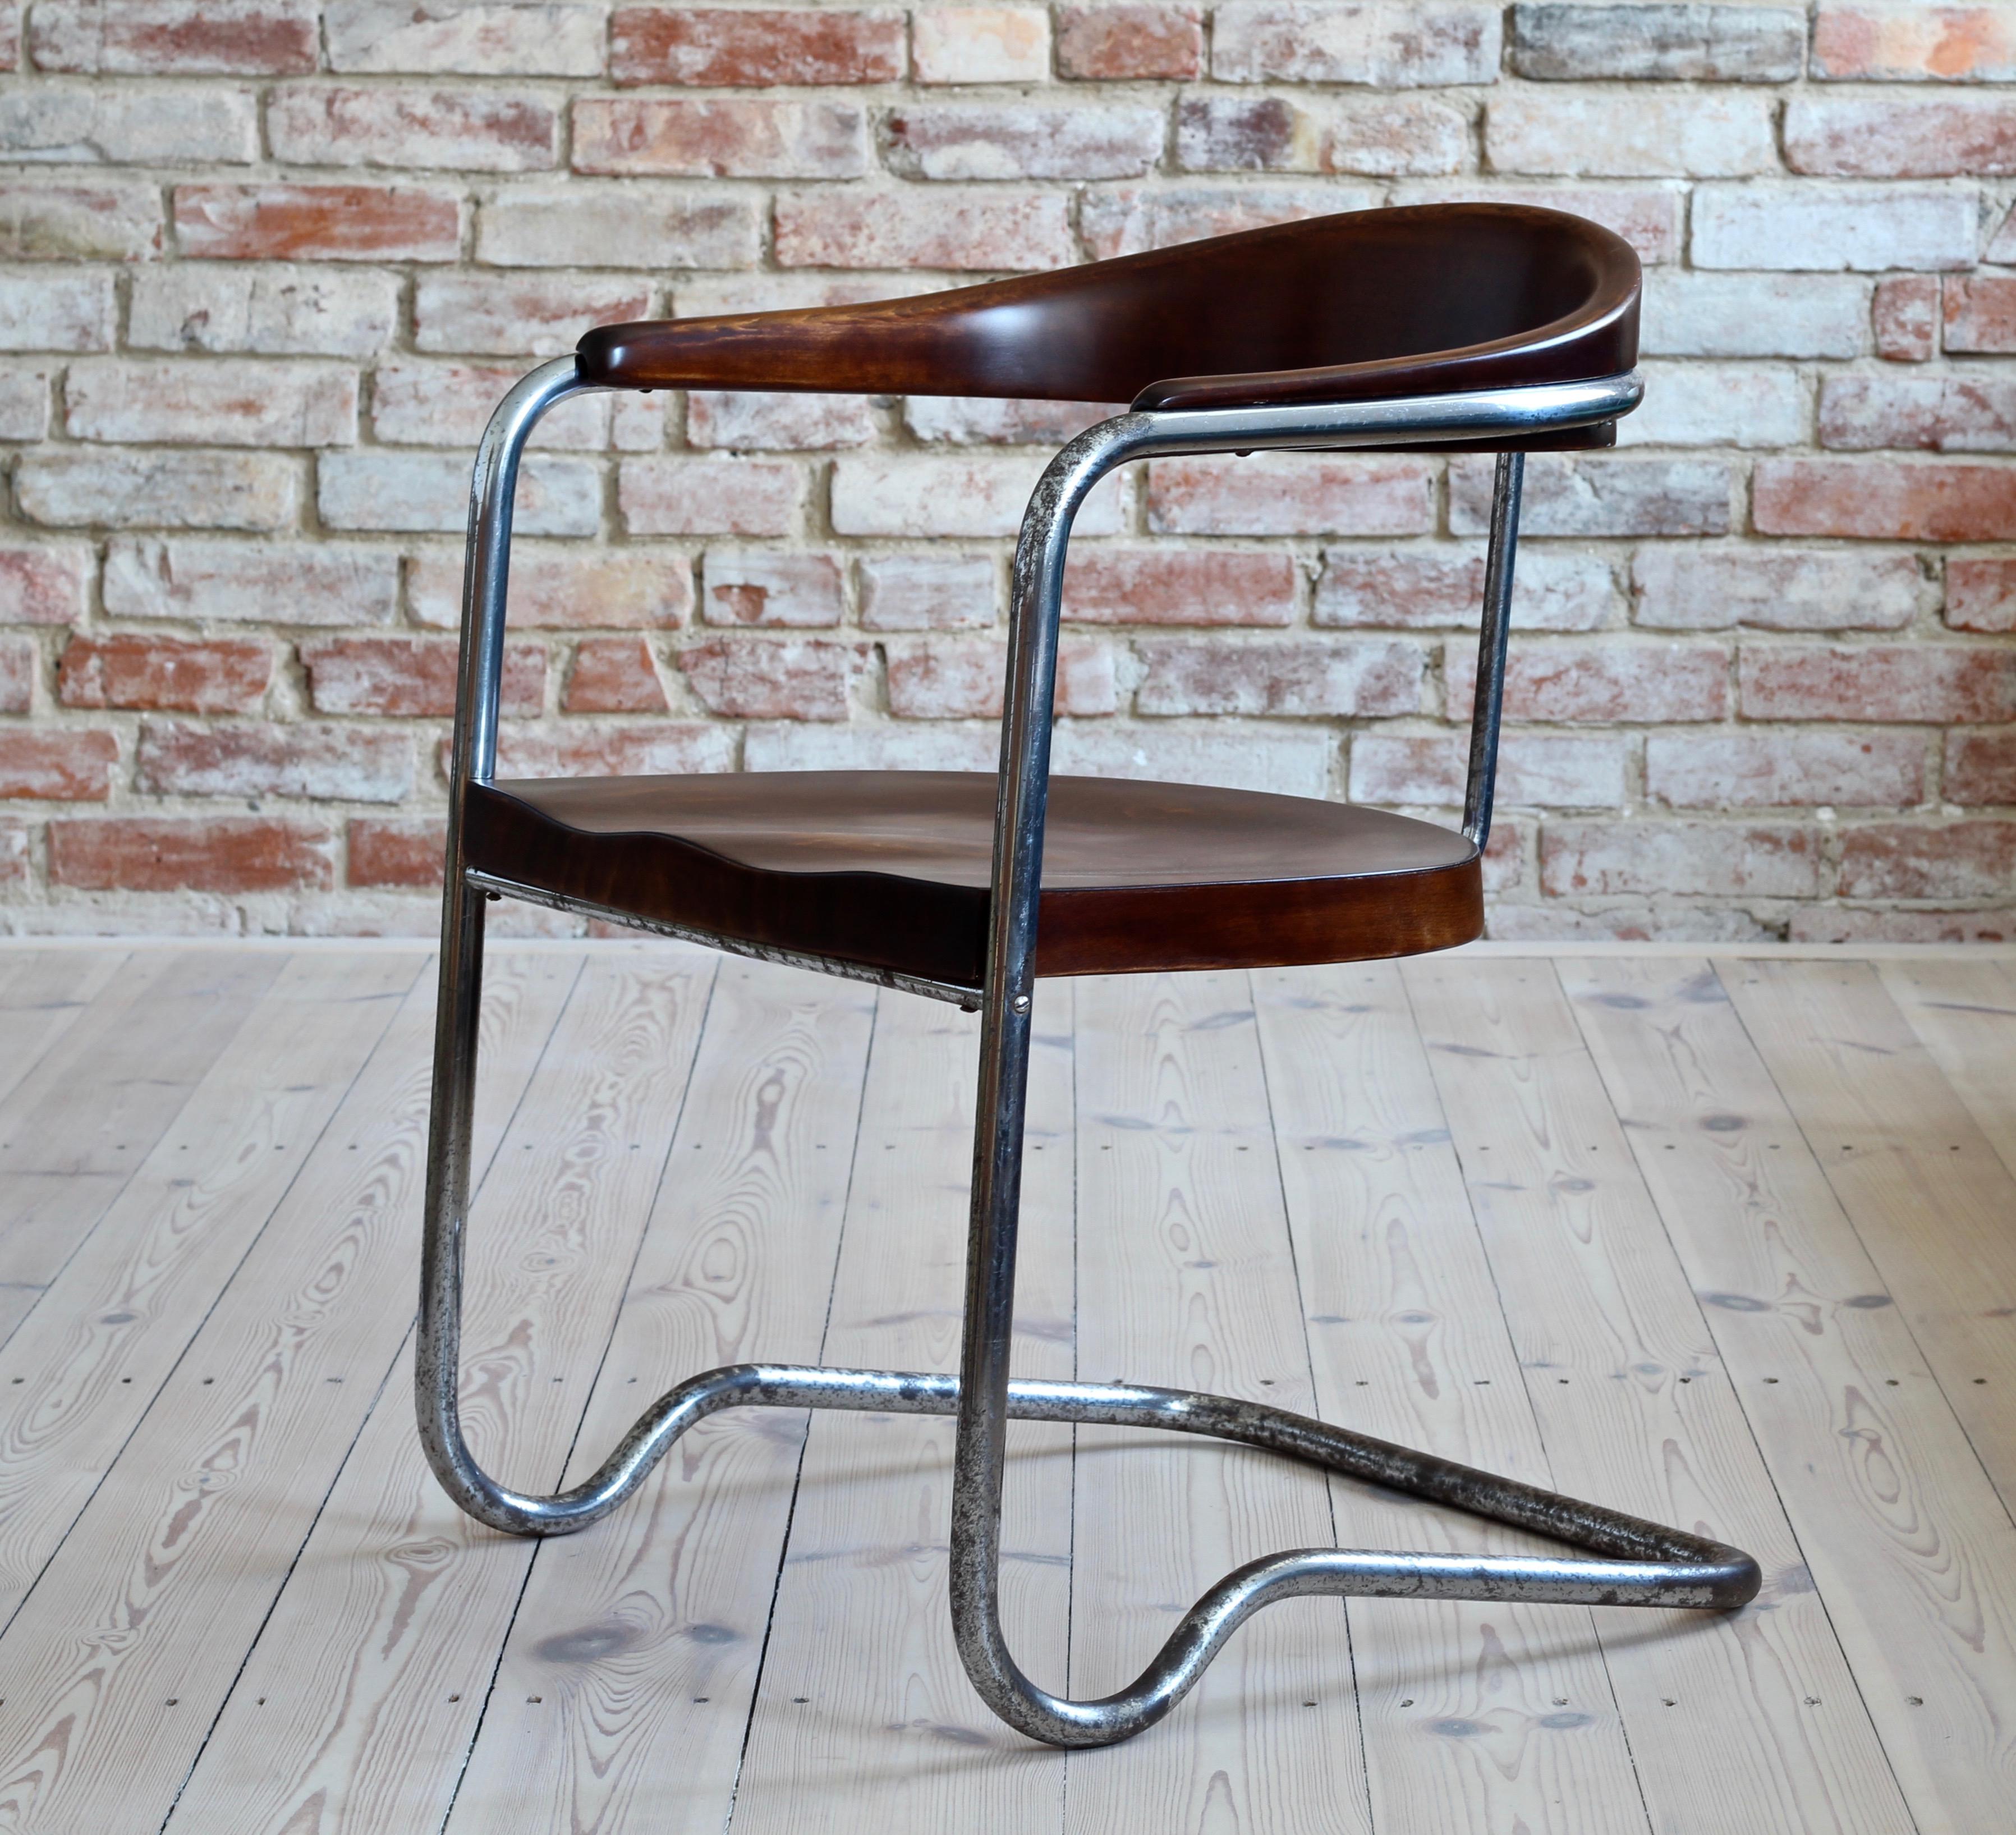 This beautiful cantilever cabinet chair was most probably designed by Hans & Wassili Luckhardt brothers, circa 1930s. The wooden elements have been refreshed and are in excellent condition. The tubular chrome steel frame remains in its original